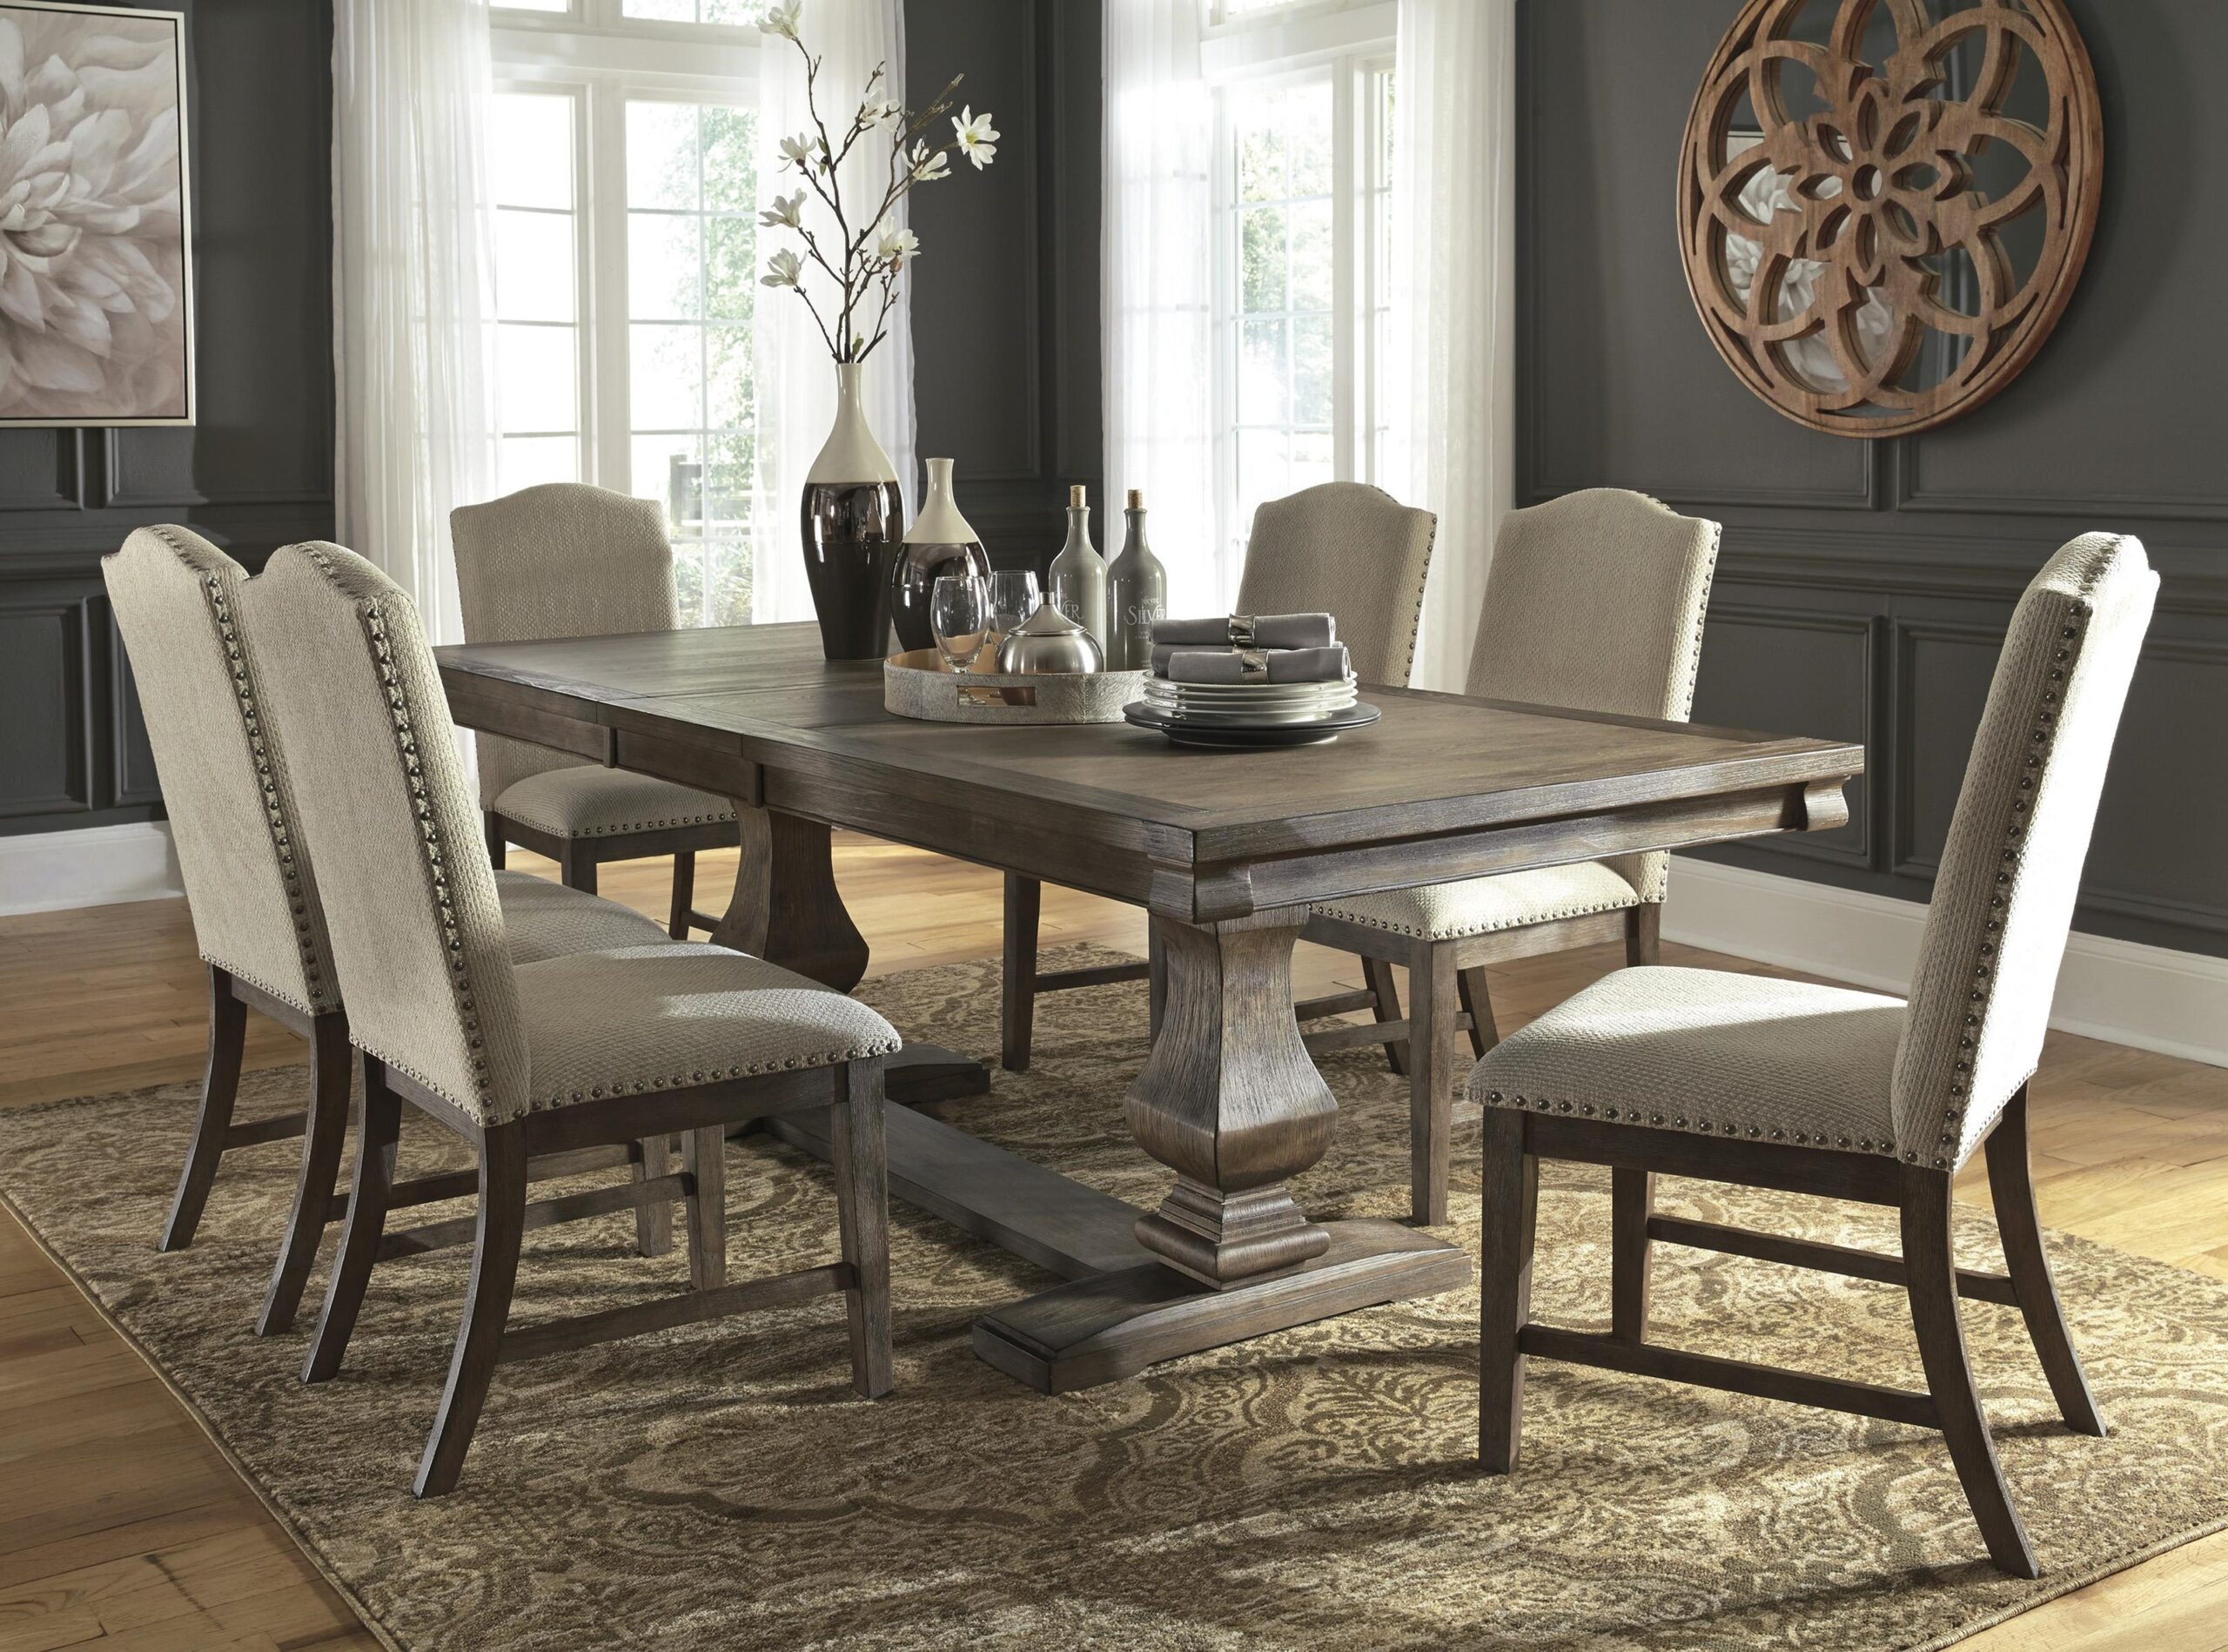 10 Stylish Dining Room Decoration Ideas for New Homeowners in 2020 ...